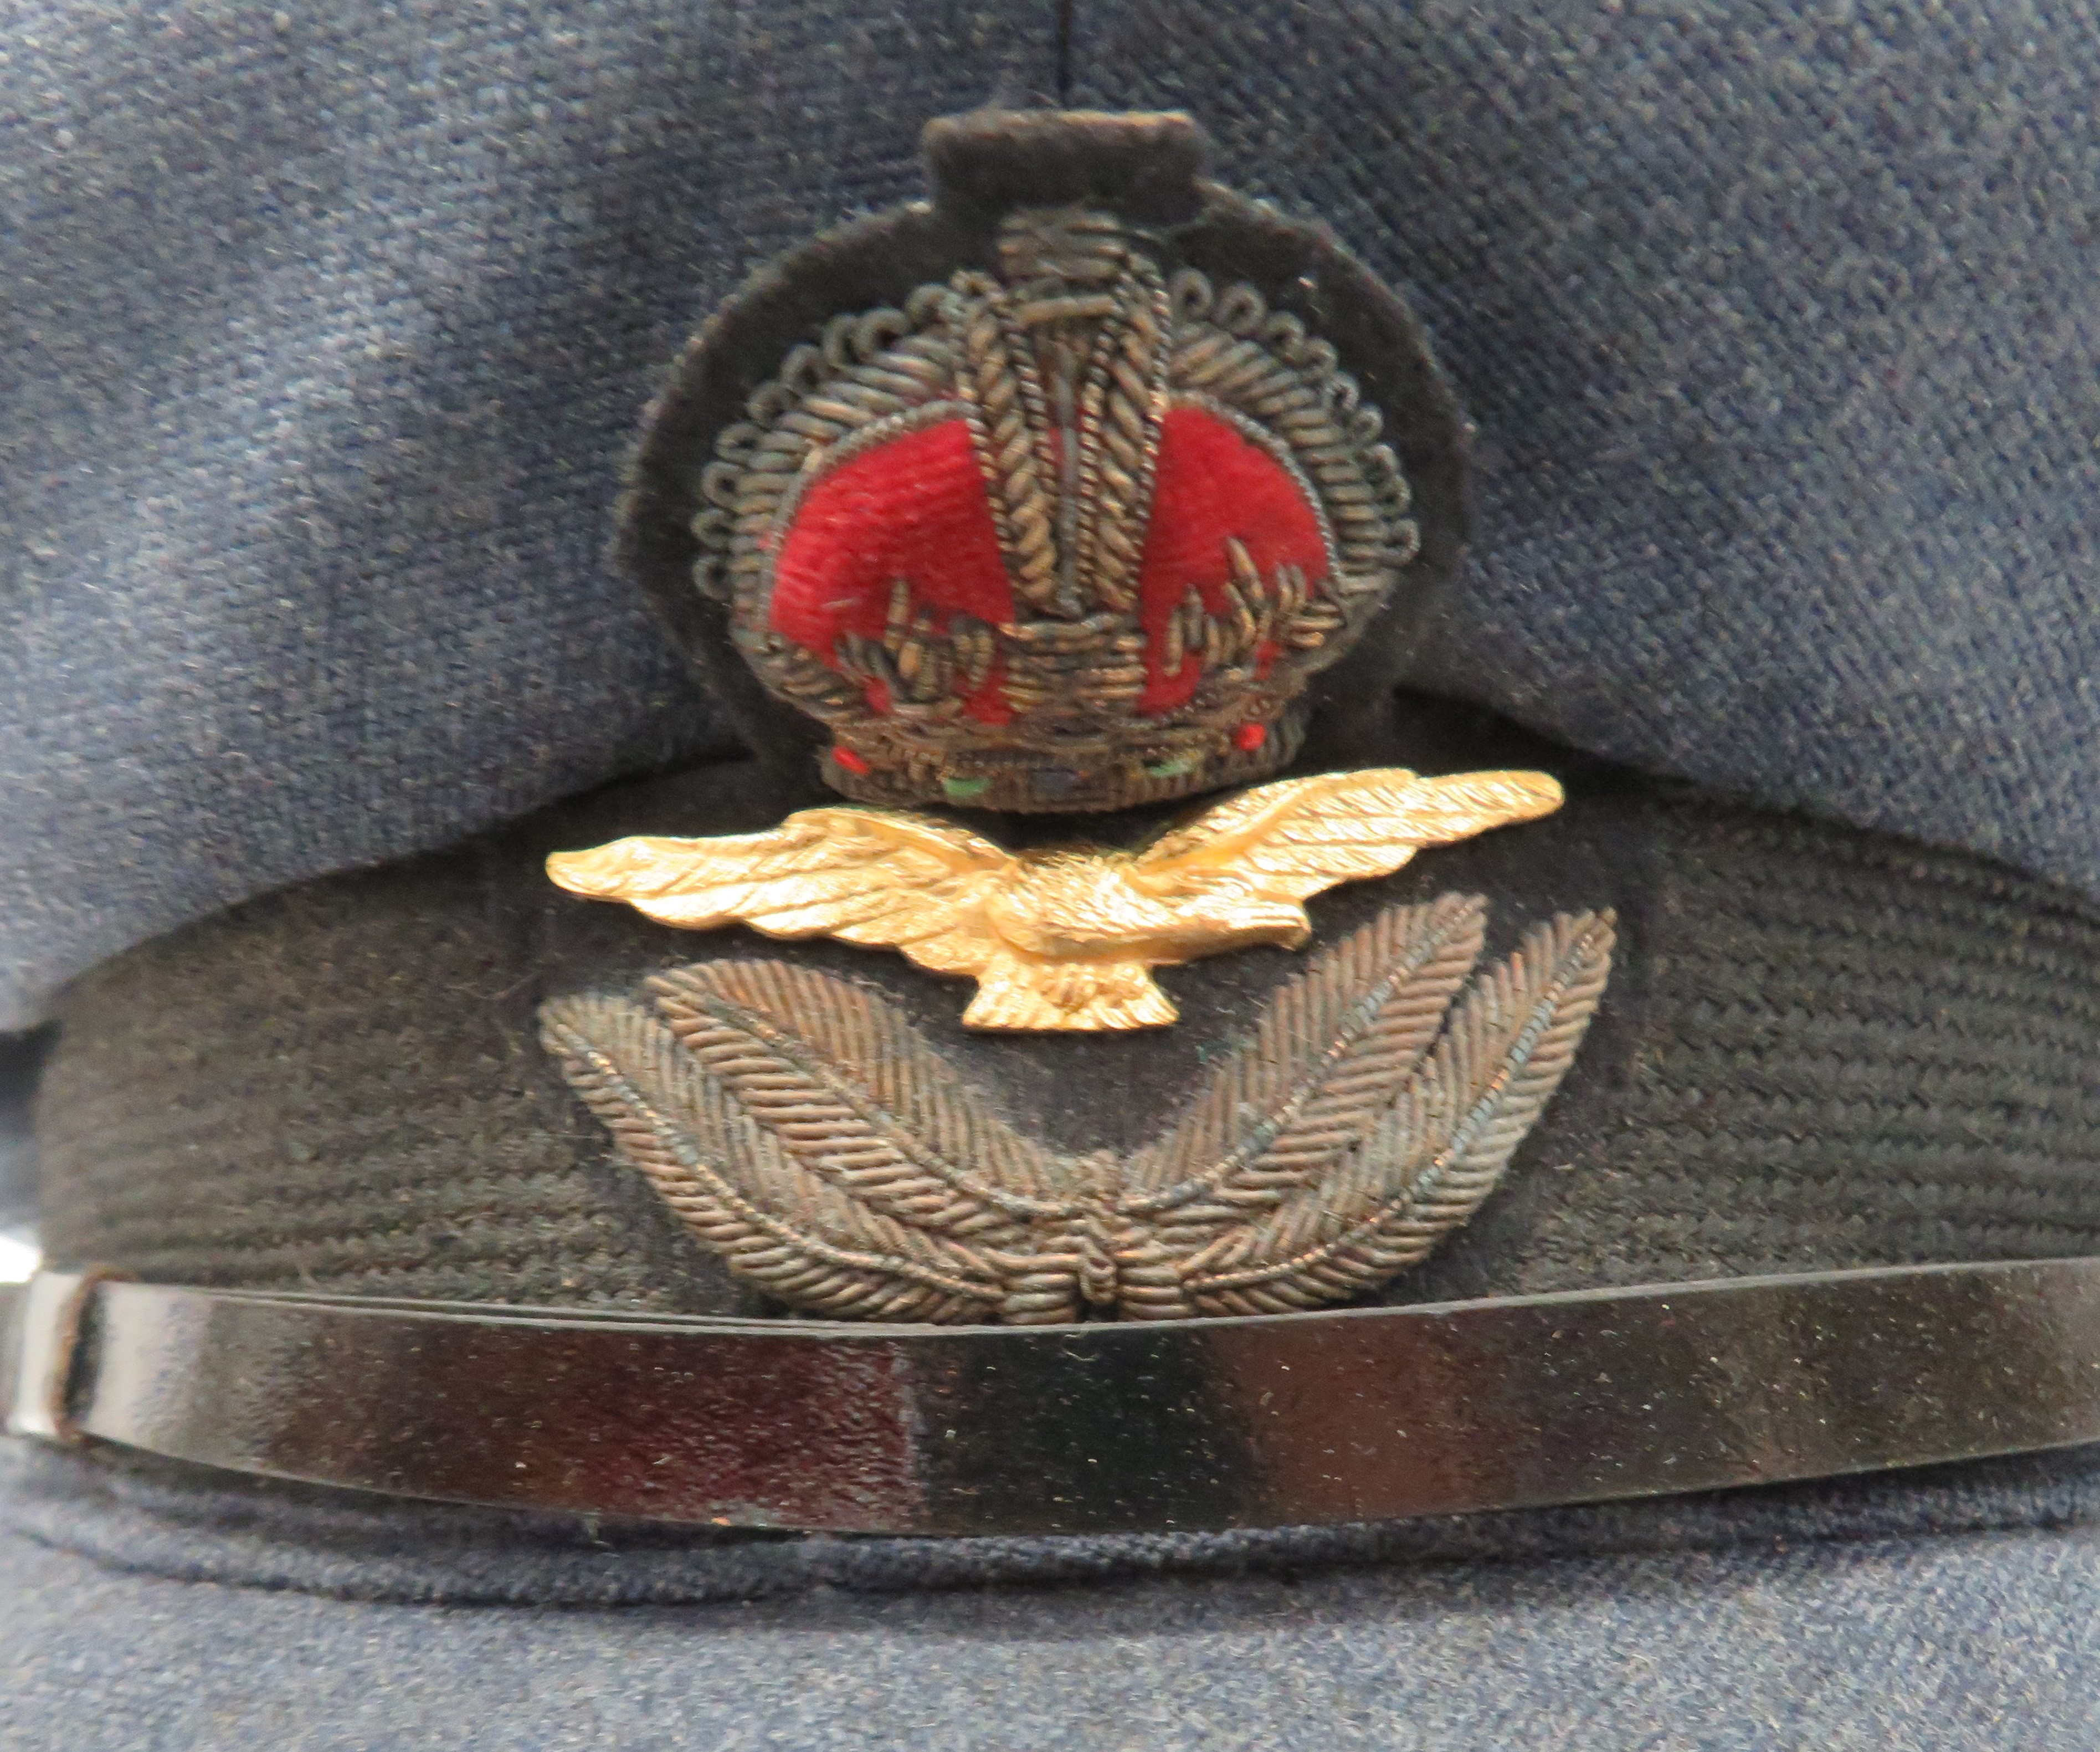 Pre WW2 Royal Air Force Officer's Service Dress Cap blue grey crown, body and stiffened peak. - Image 2 of 2